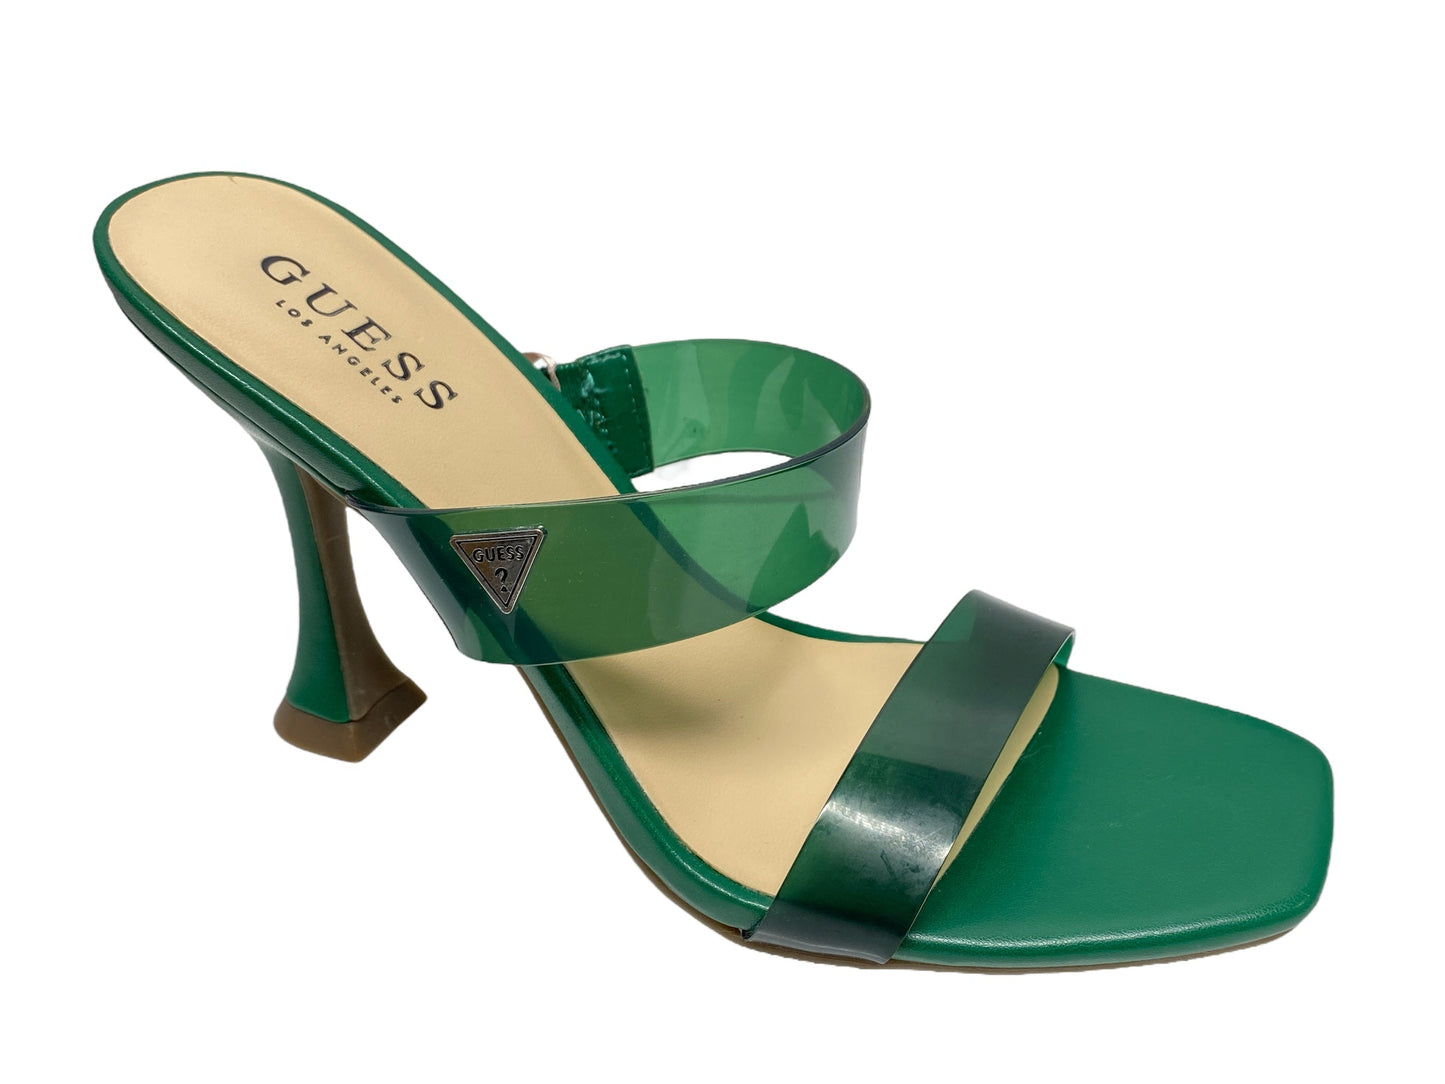 Green Shoes Heels Stiletto Guess, Size 7.5